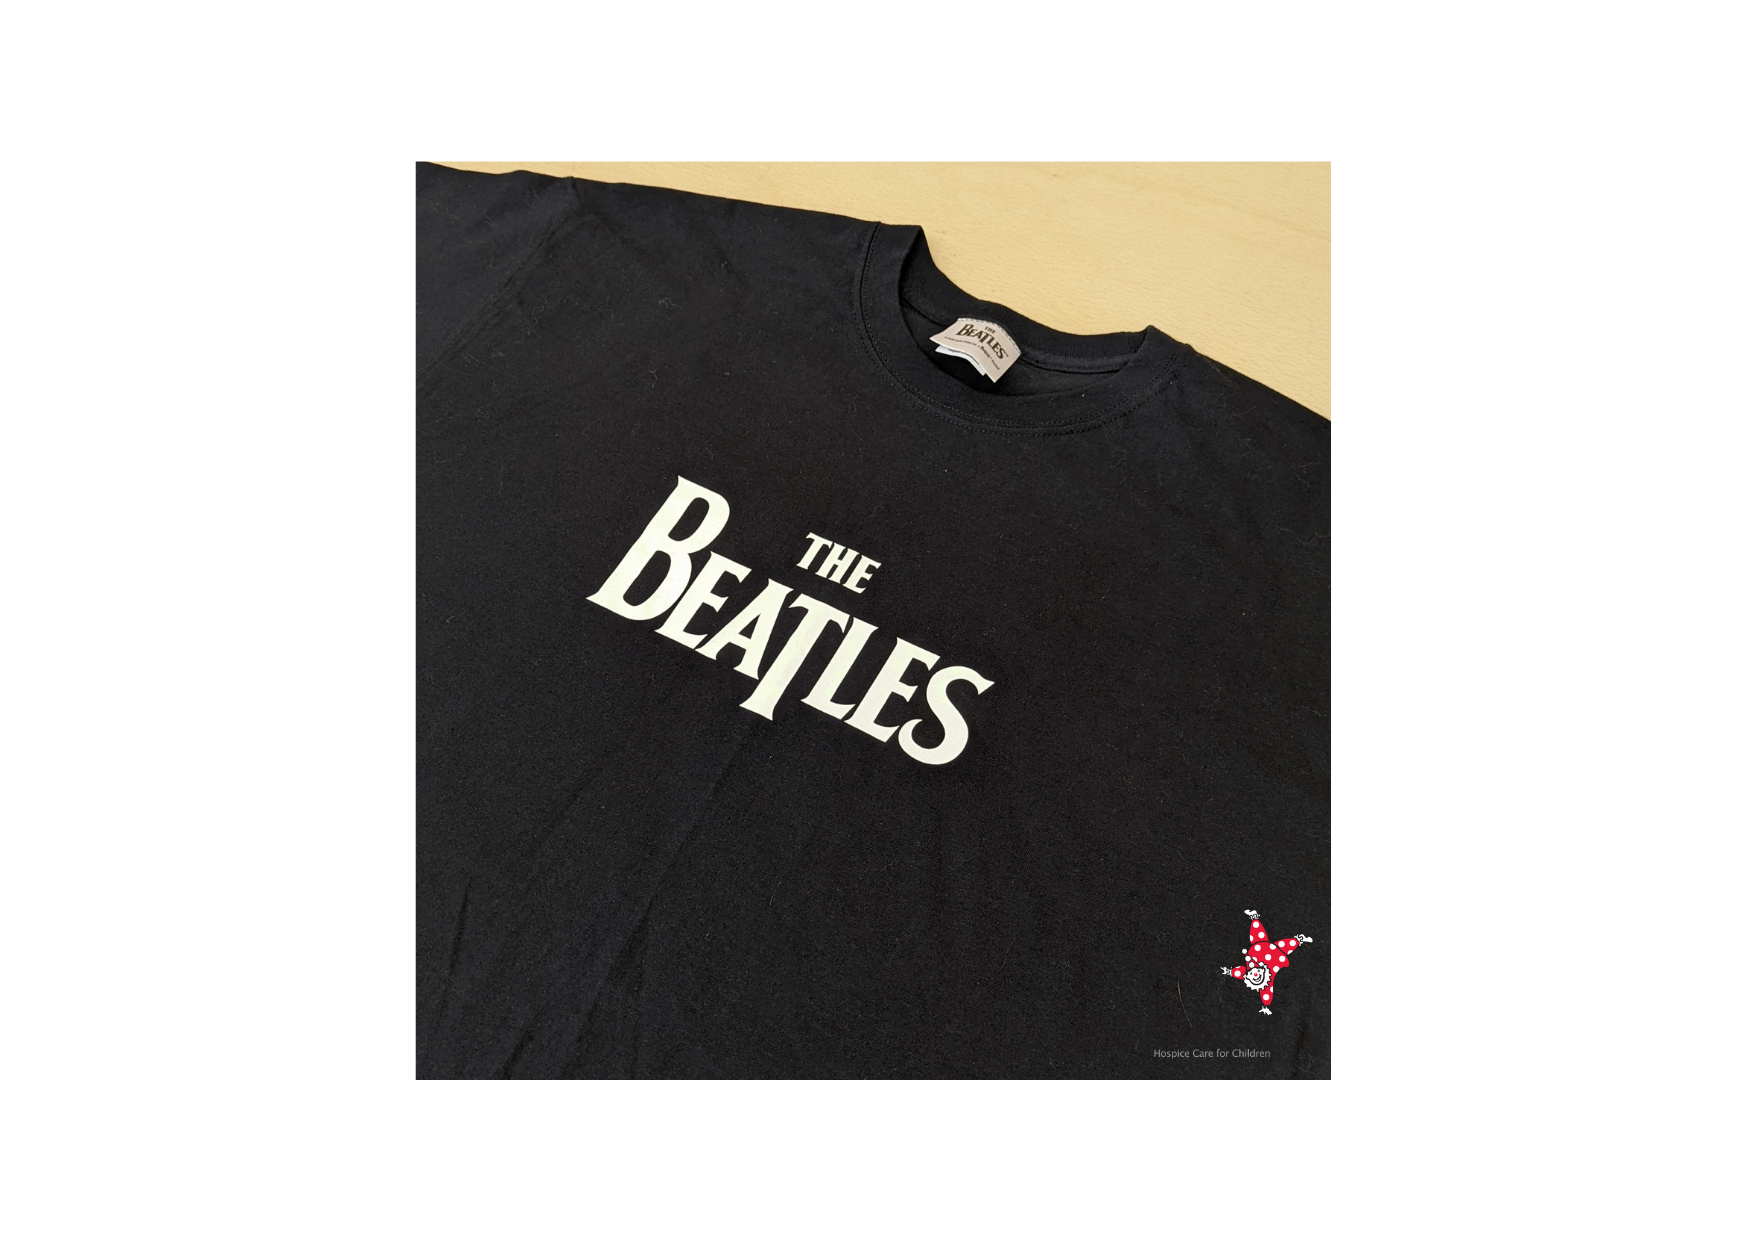 Plain black t shirt with "The Beatles" in white spell out